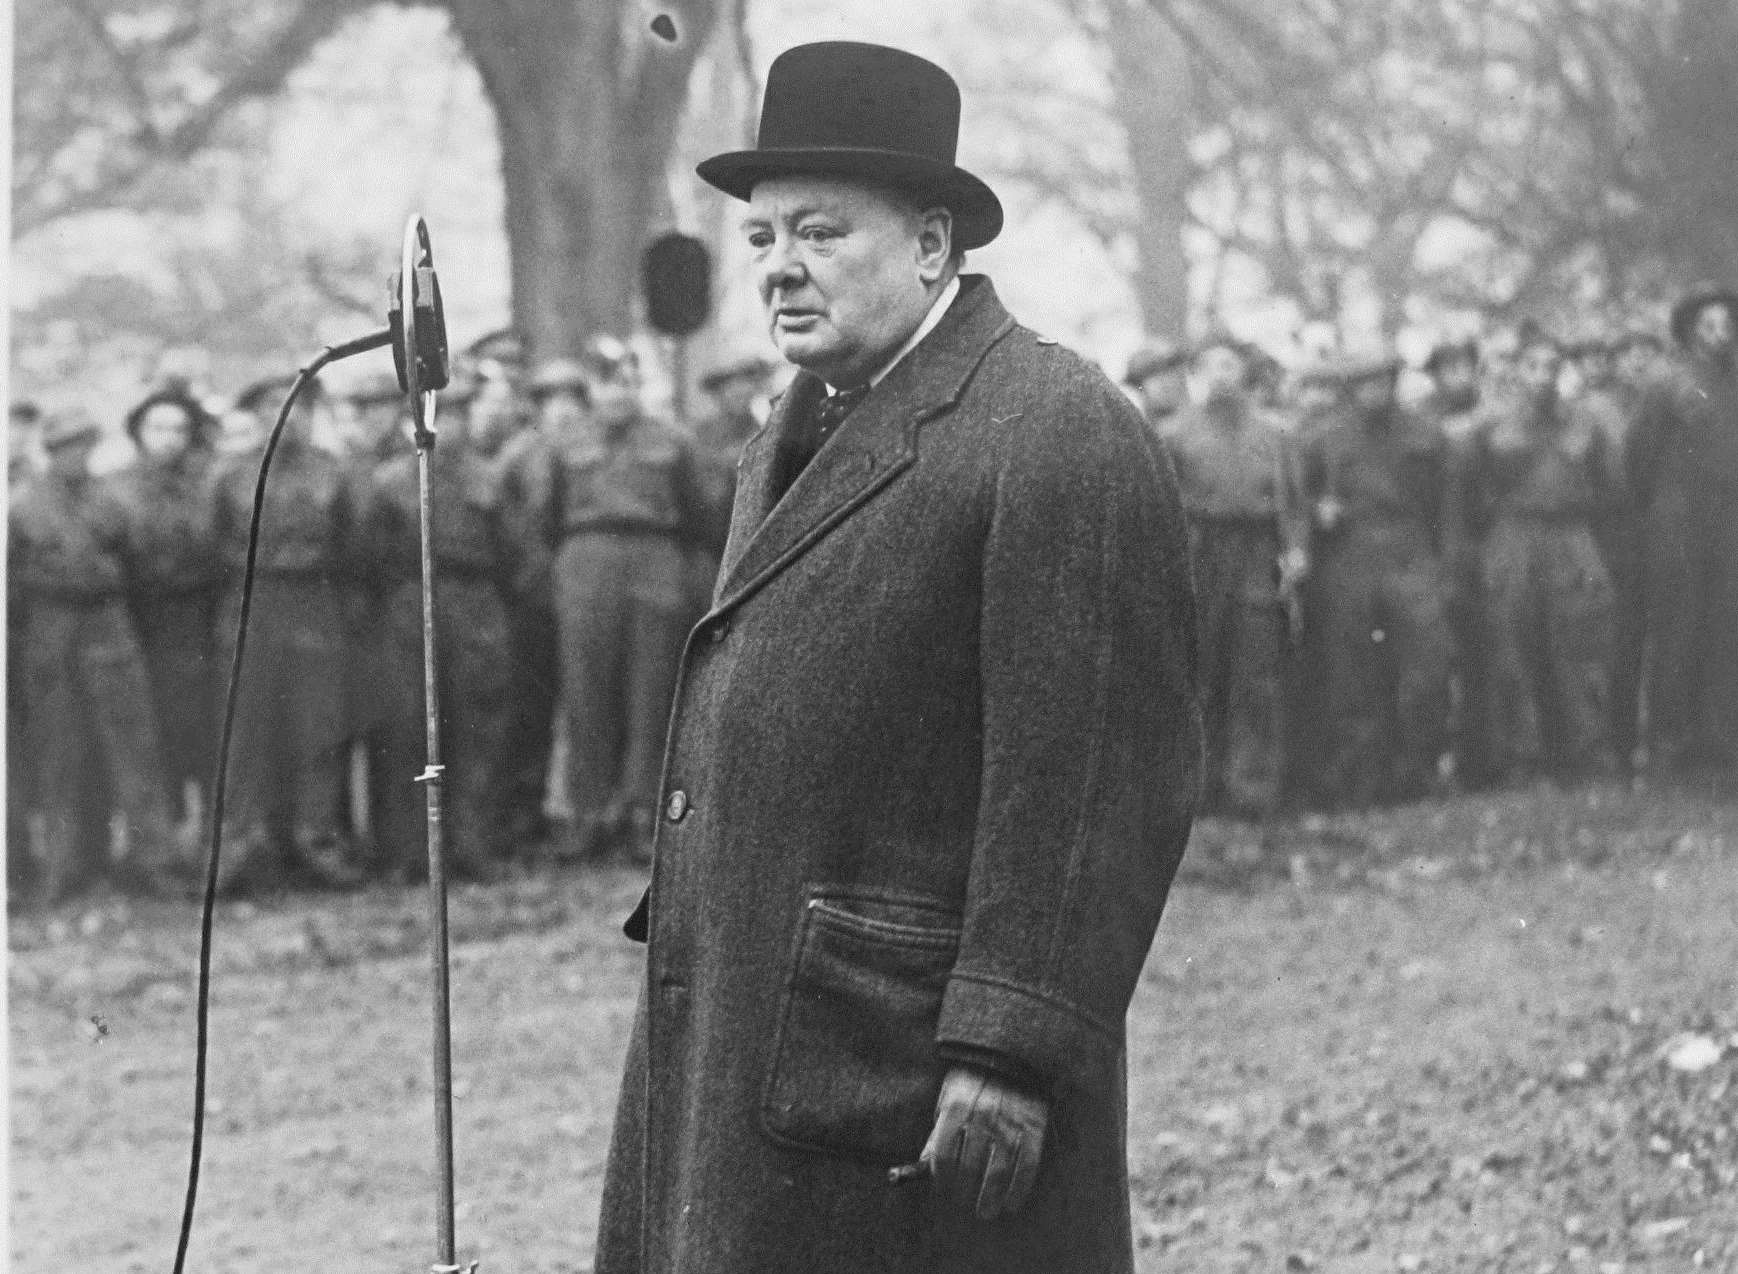 Many of Churchill's most famous speeches were written at Chartwell